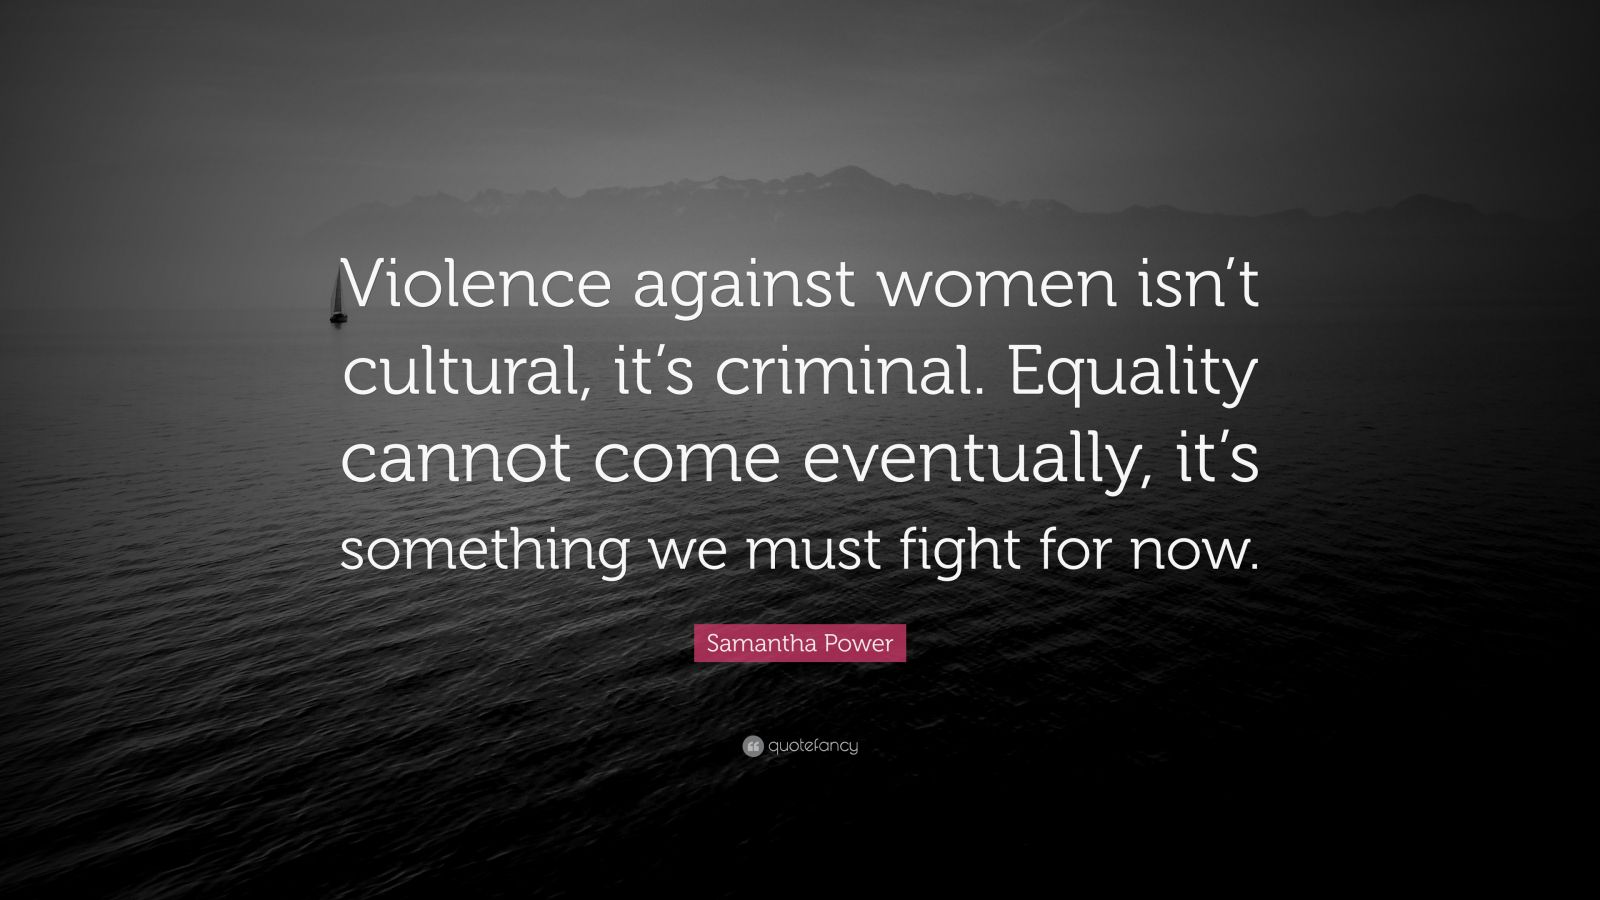 Samantha Power Quote: “Violence against women isn’t cultural, it’s